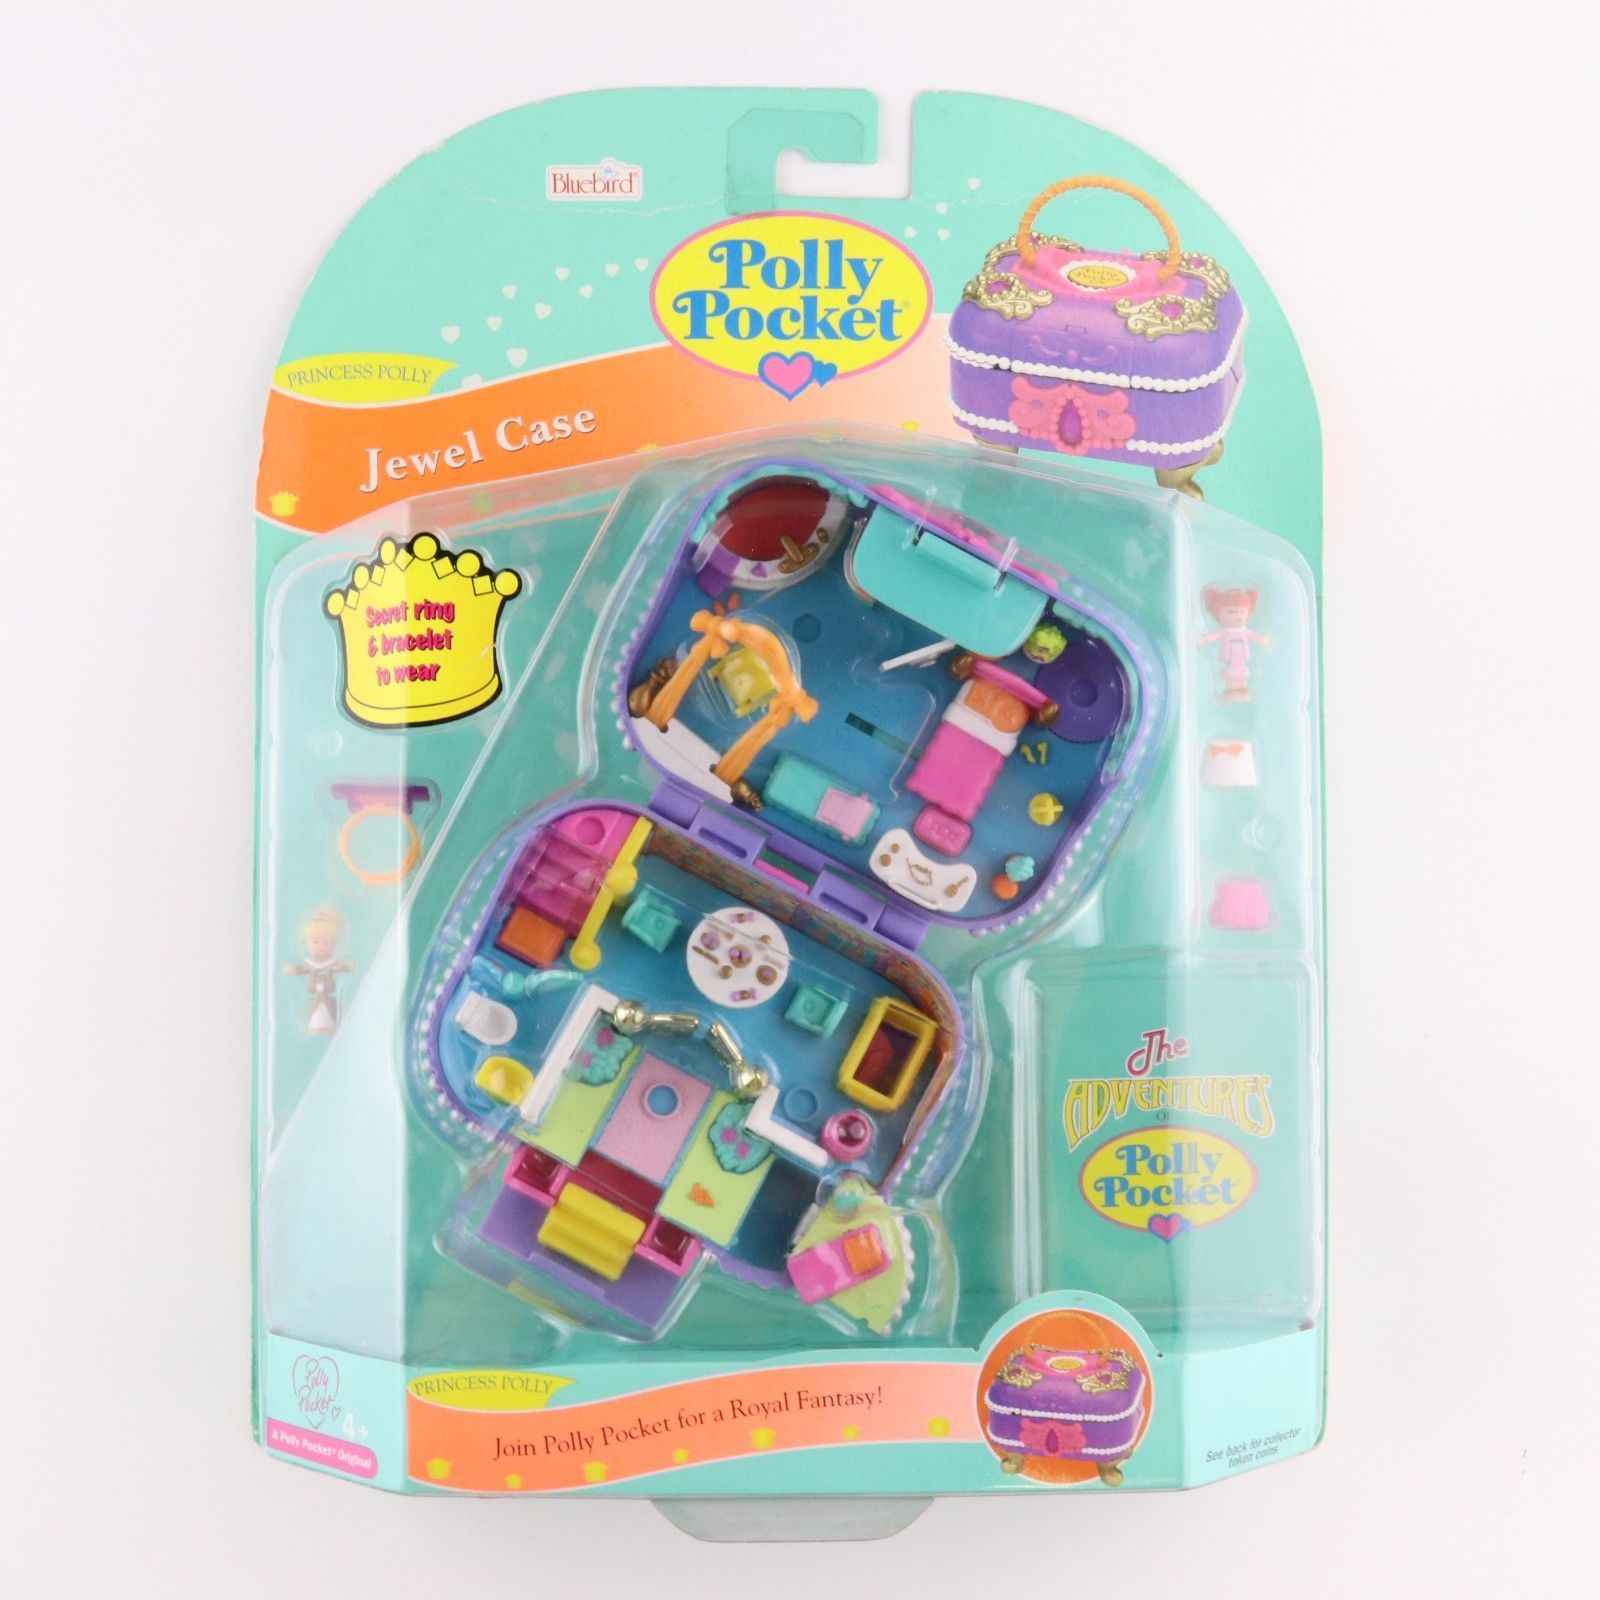 polly pocket compacts 2018